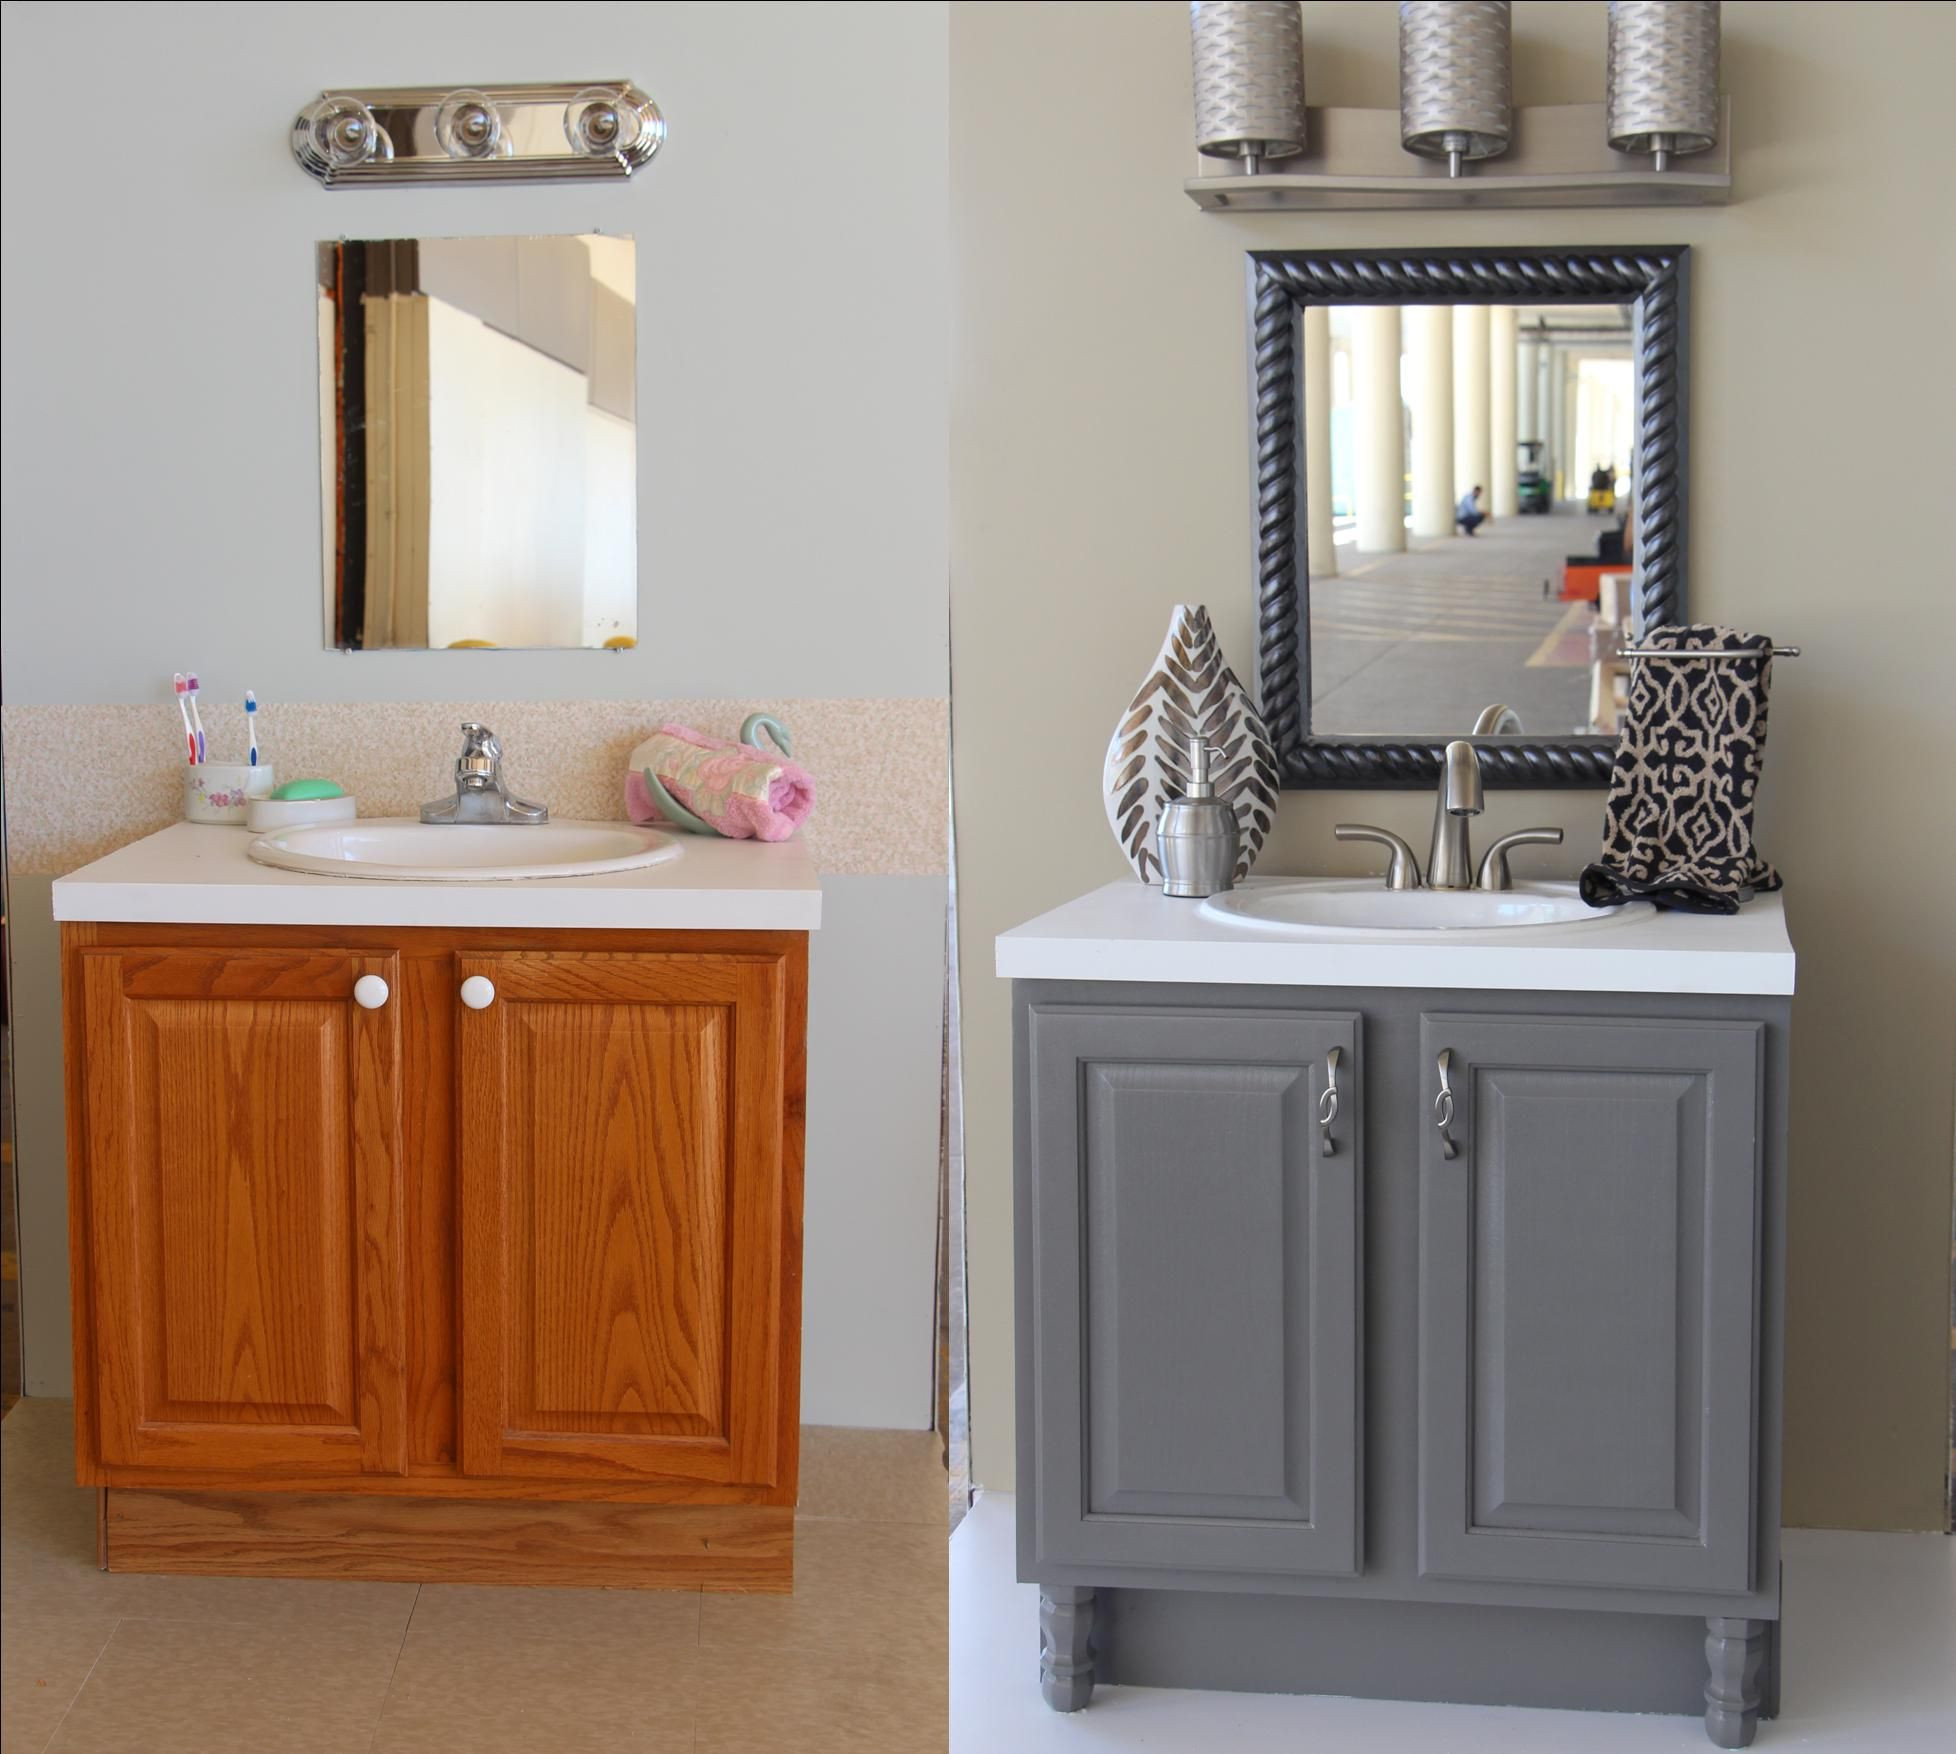 Repainting Bathroom Cabinets
 Bathroom Updates You Can Do This Weekend